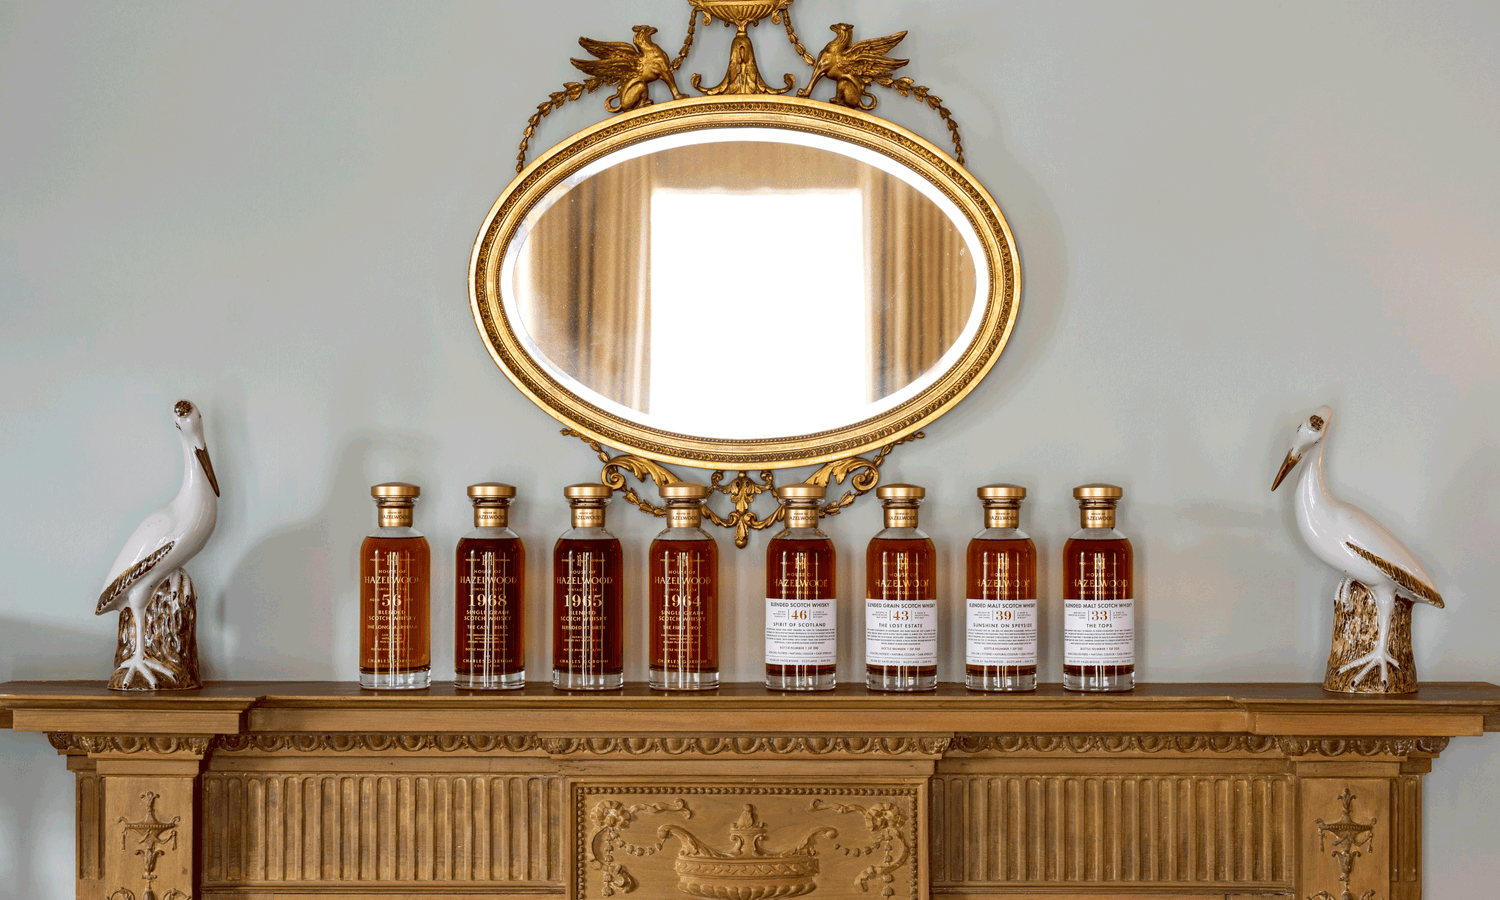 House of Hazelwood Whiskies lined in a row on top of a mantel